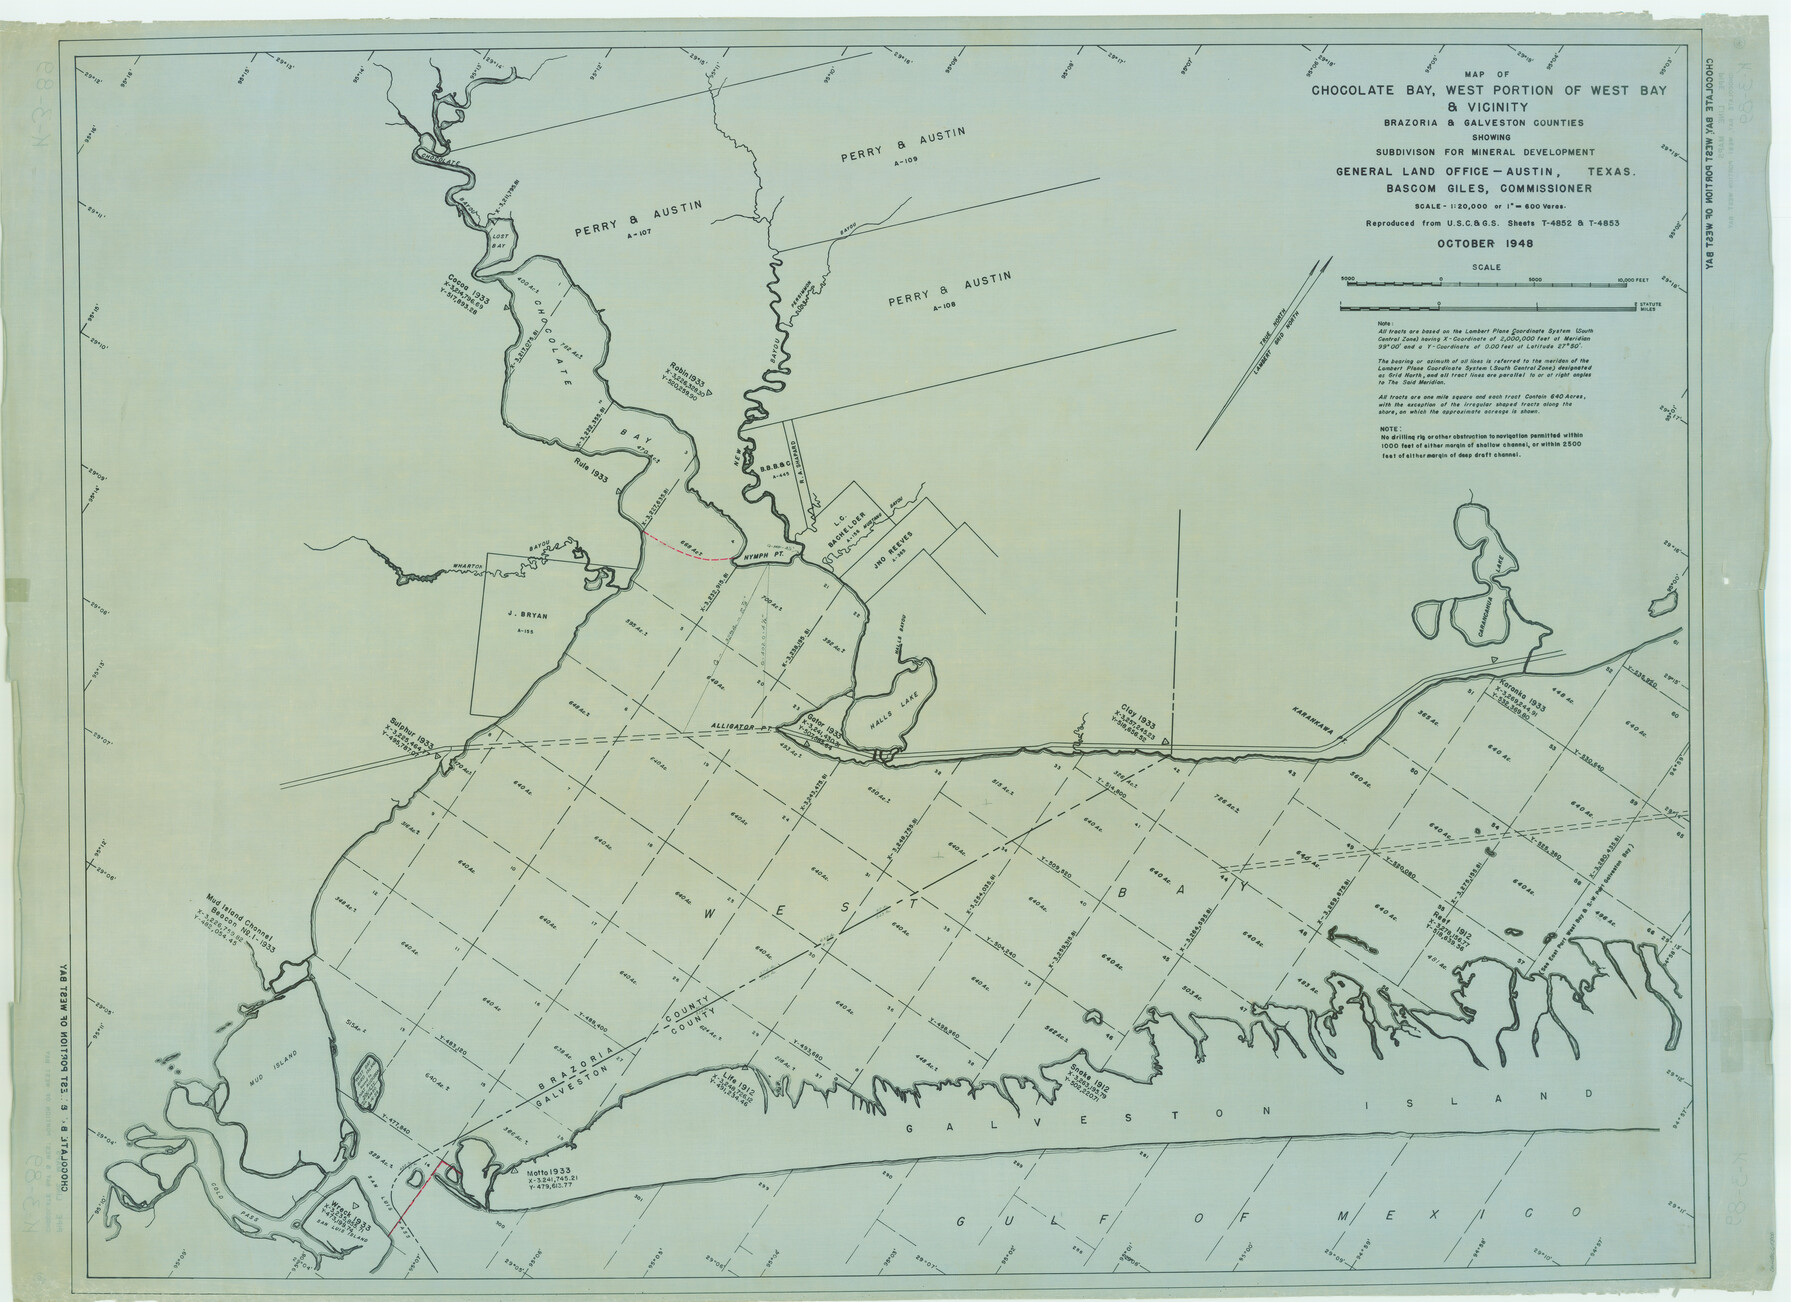 65806, Map of Chocolate Bay, west portion of West Bay & vicinity, Brazoria & Galveston Counties showing subdivision for mineral development, General Map Collection